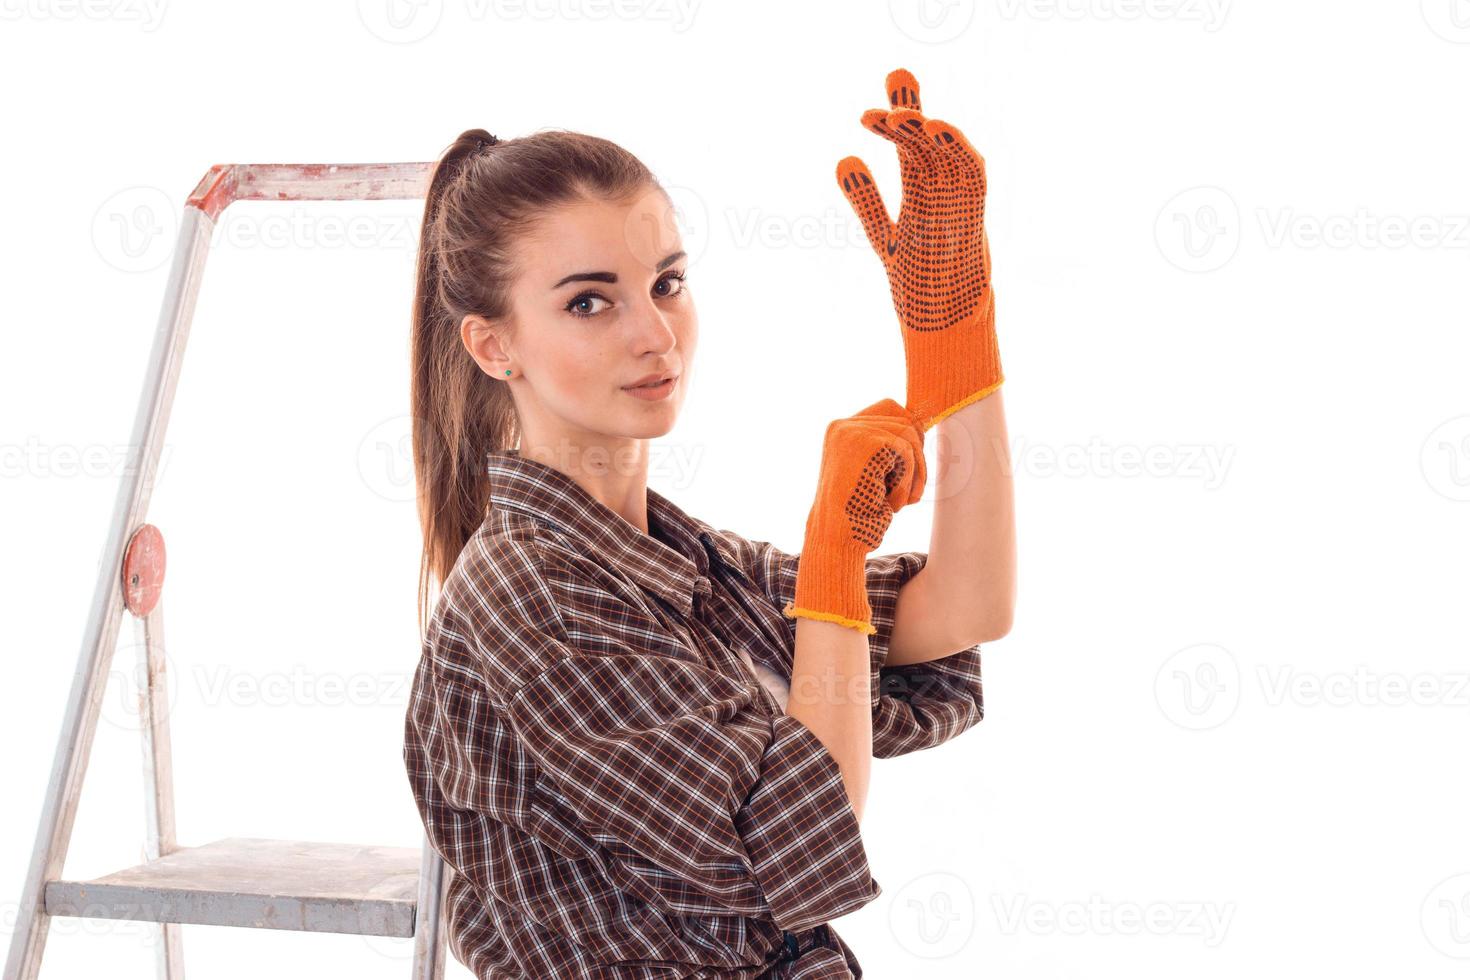 young beauty woman with dark hair in uniforl makes renovations with tools in her hands isolated on white background photo